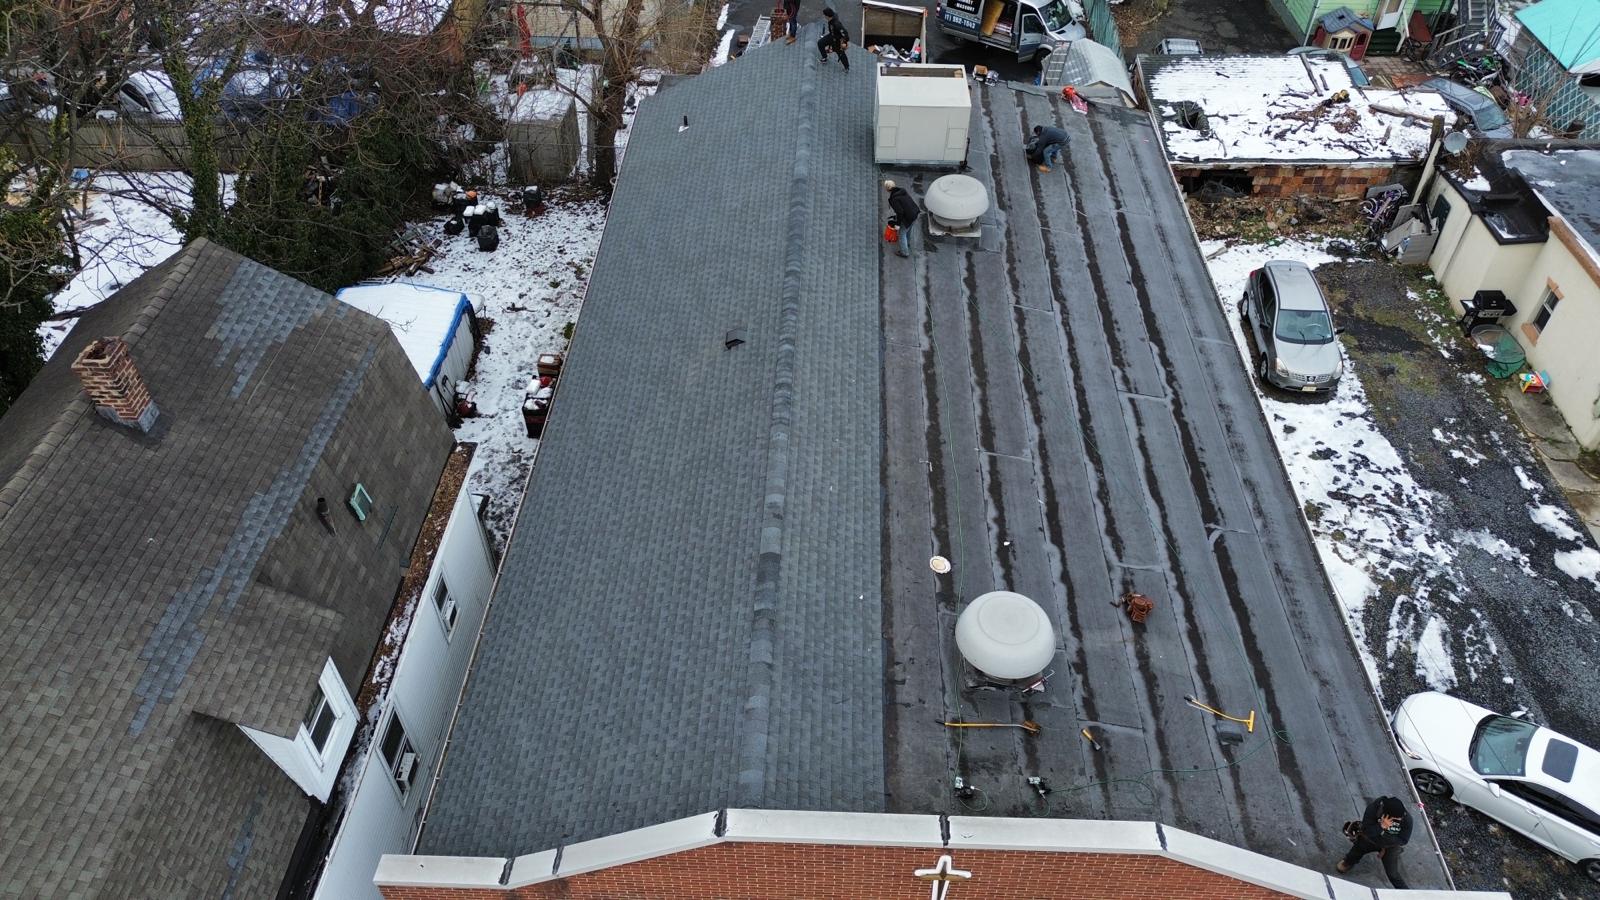 New Roof Installation in Perth Amboy NJ Project Shot 18